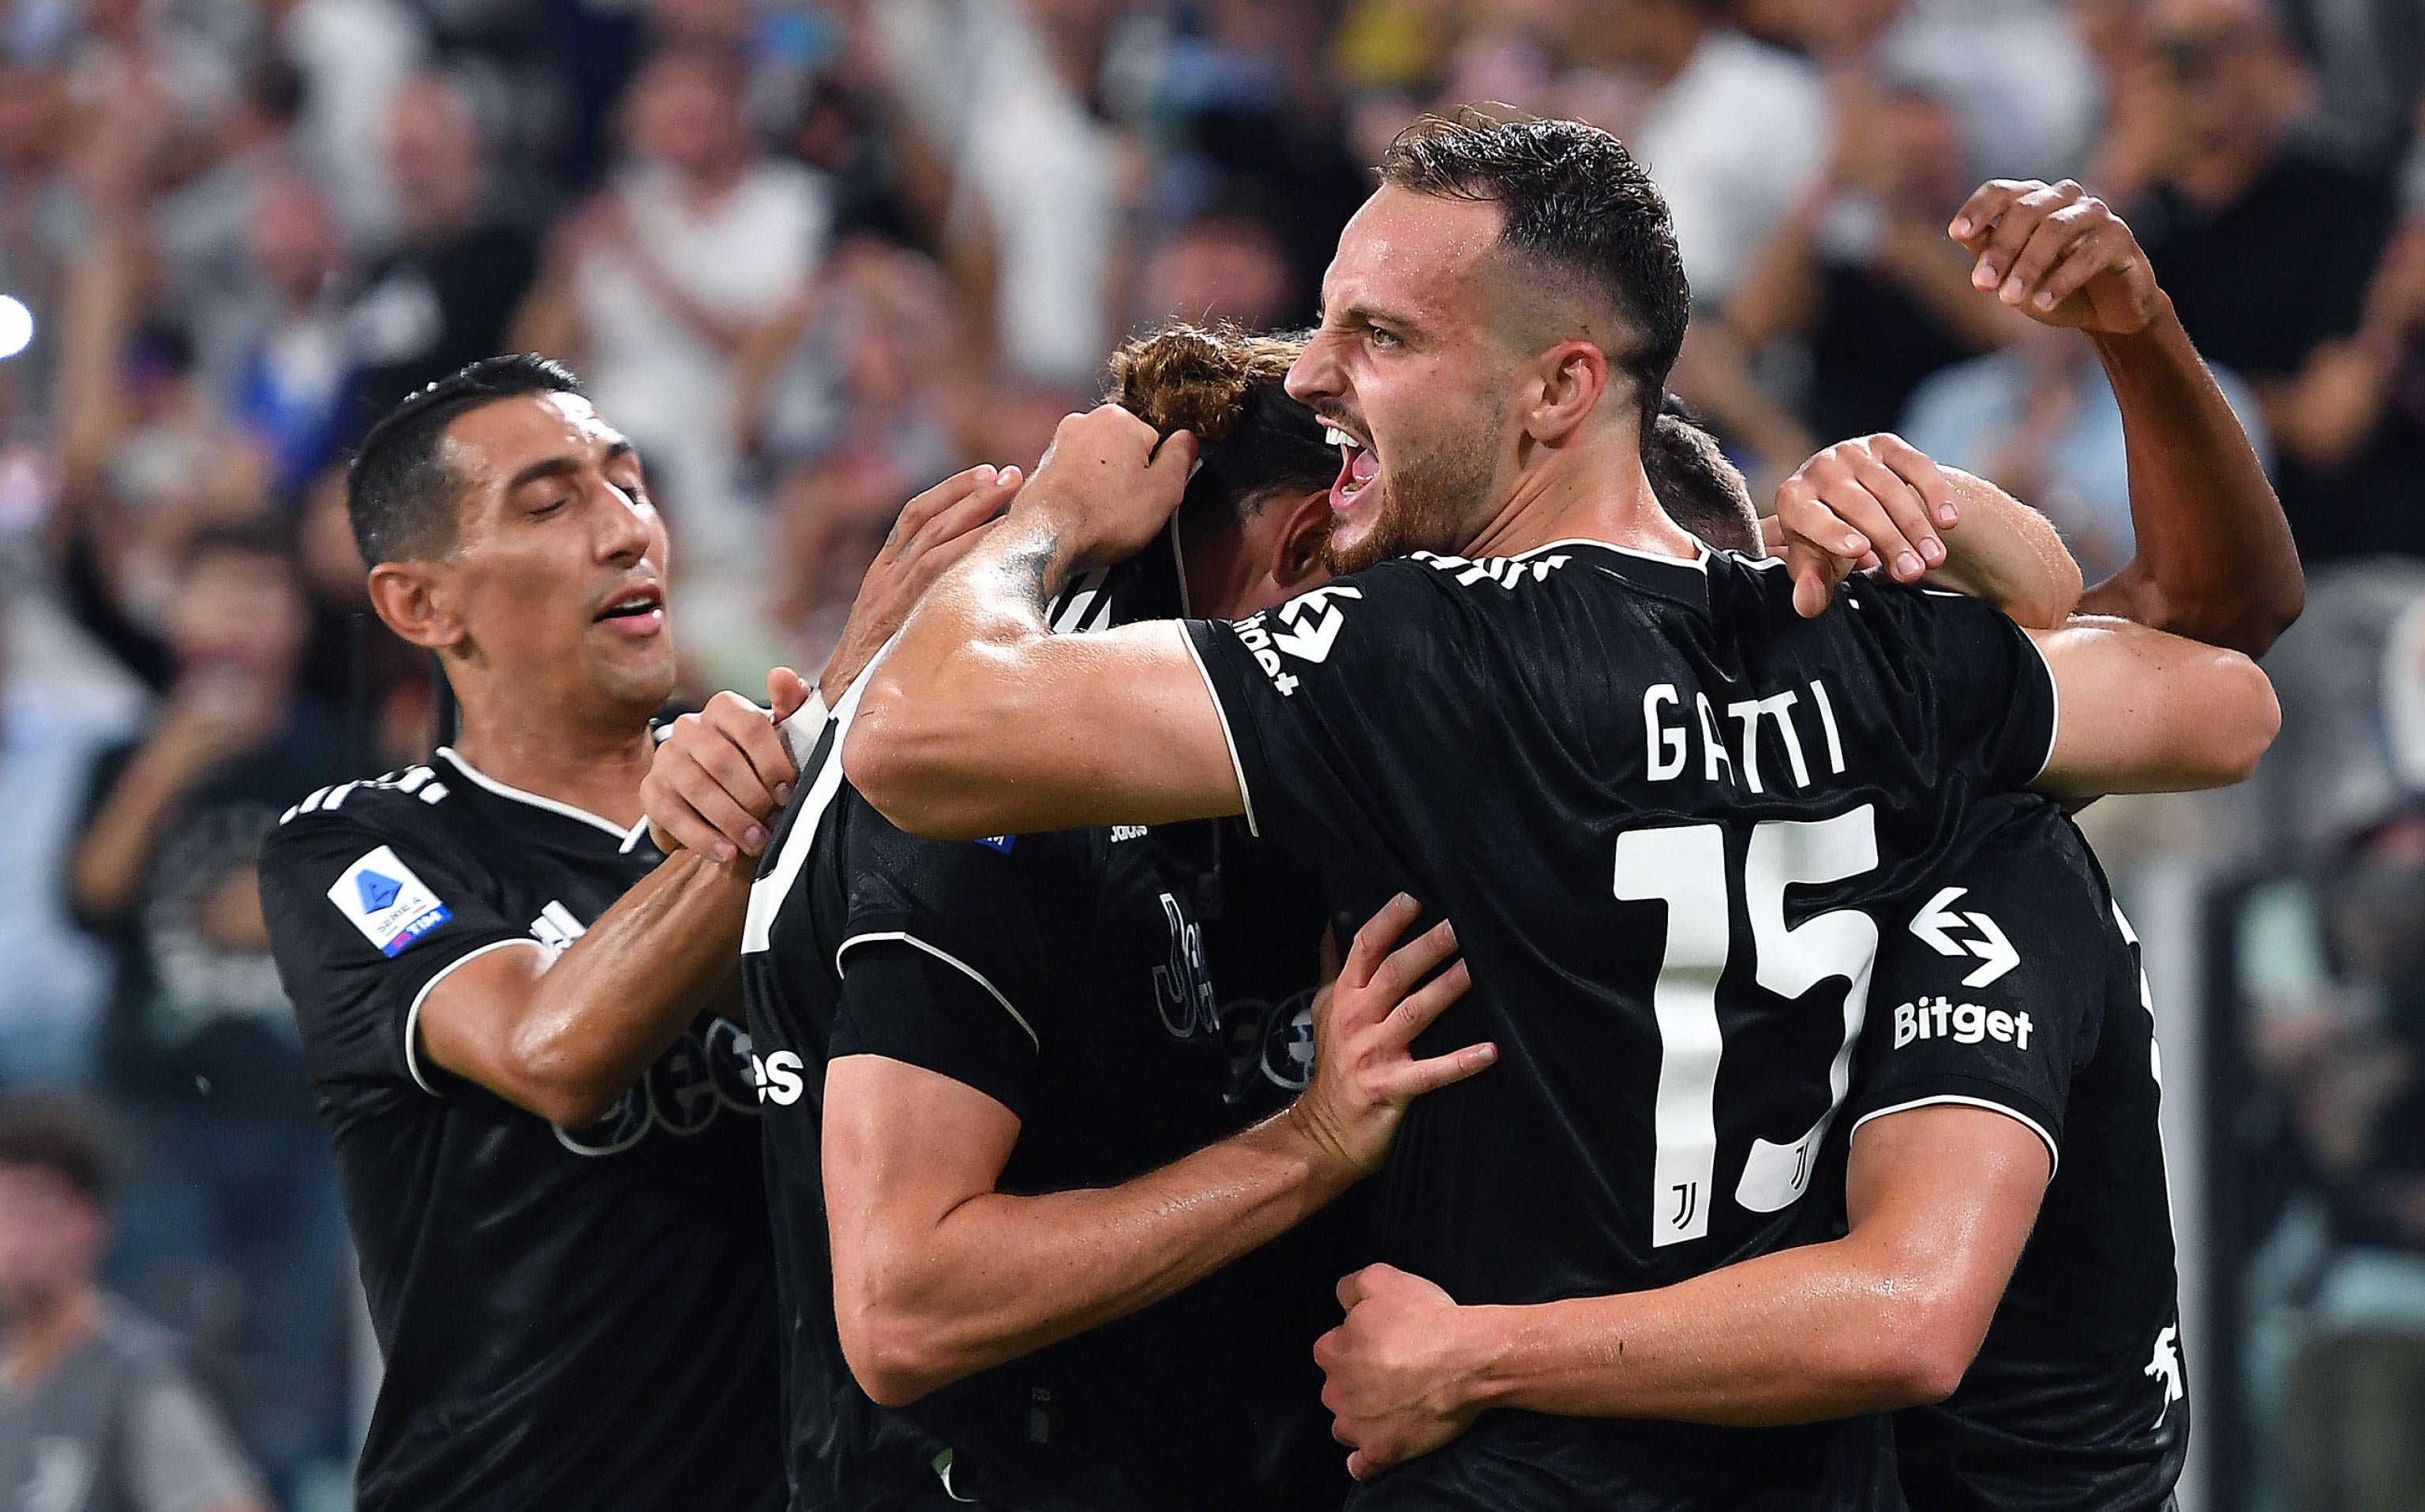 Juventus will look to spring an upset against PSG in Paris